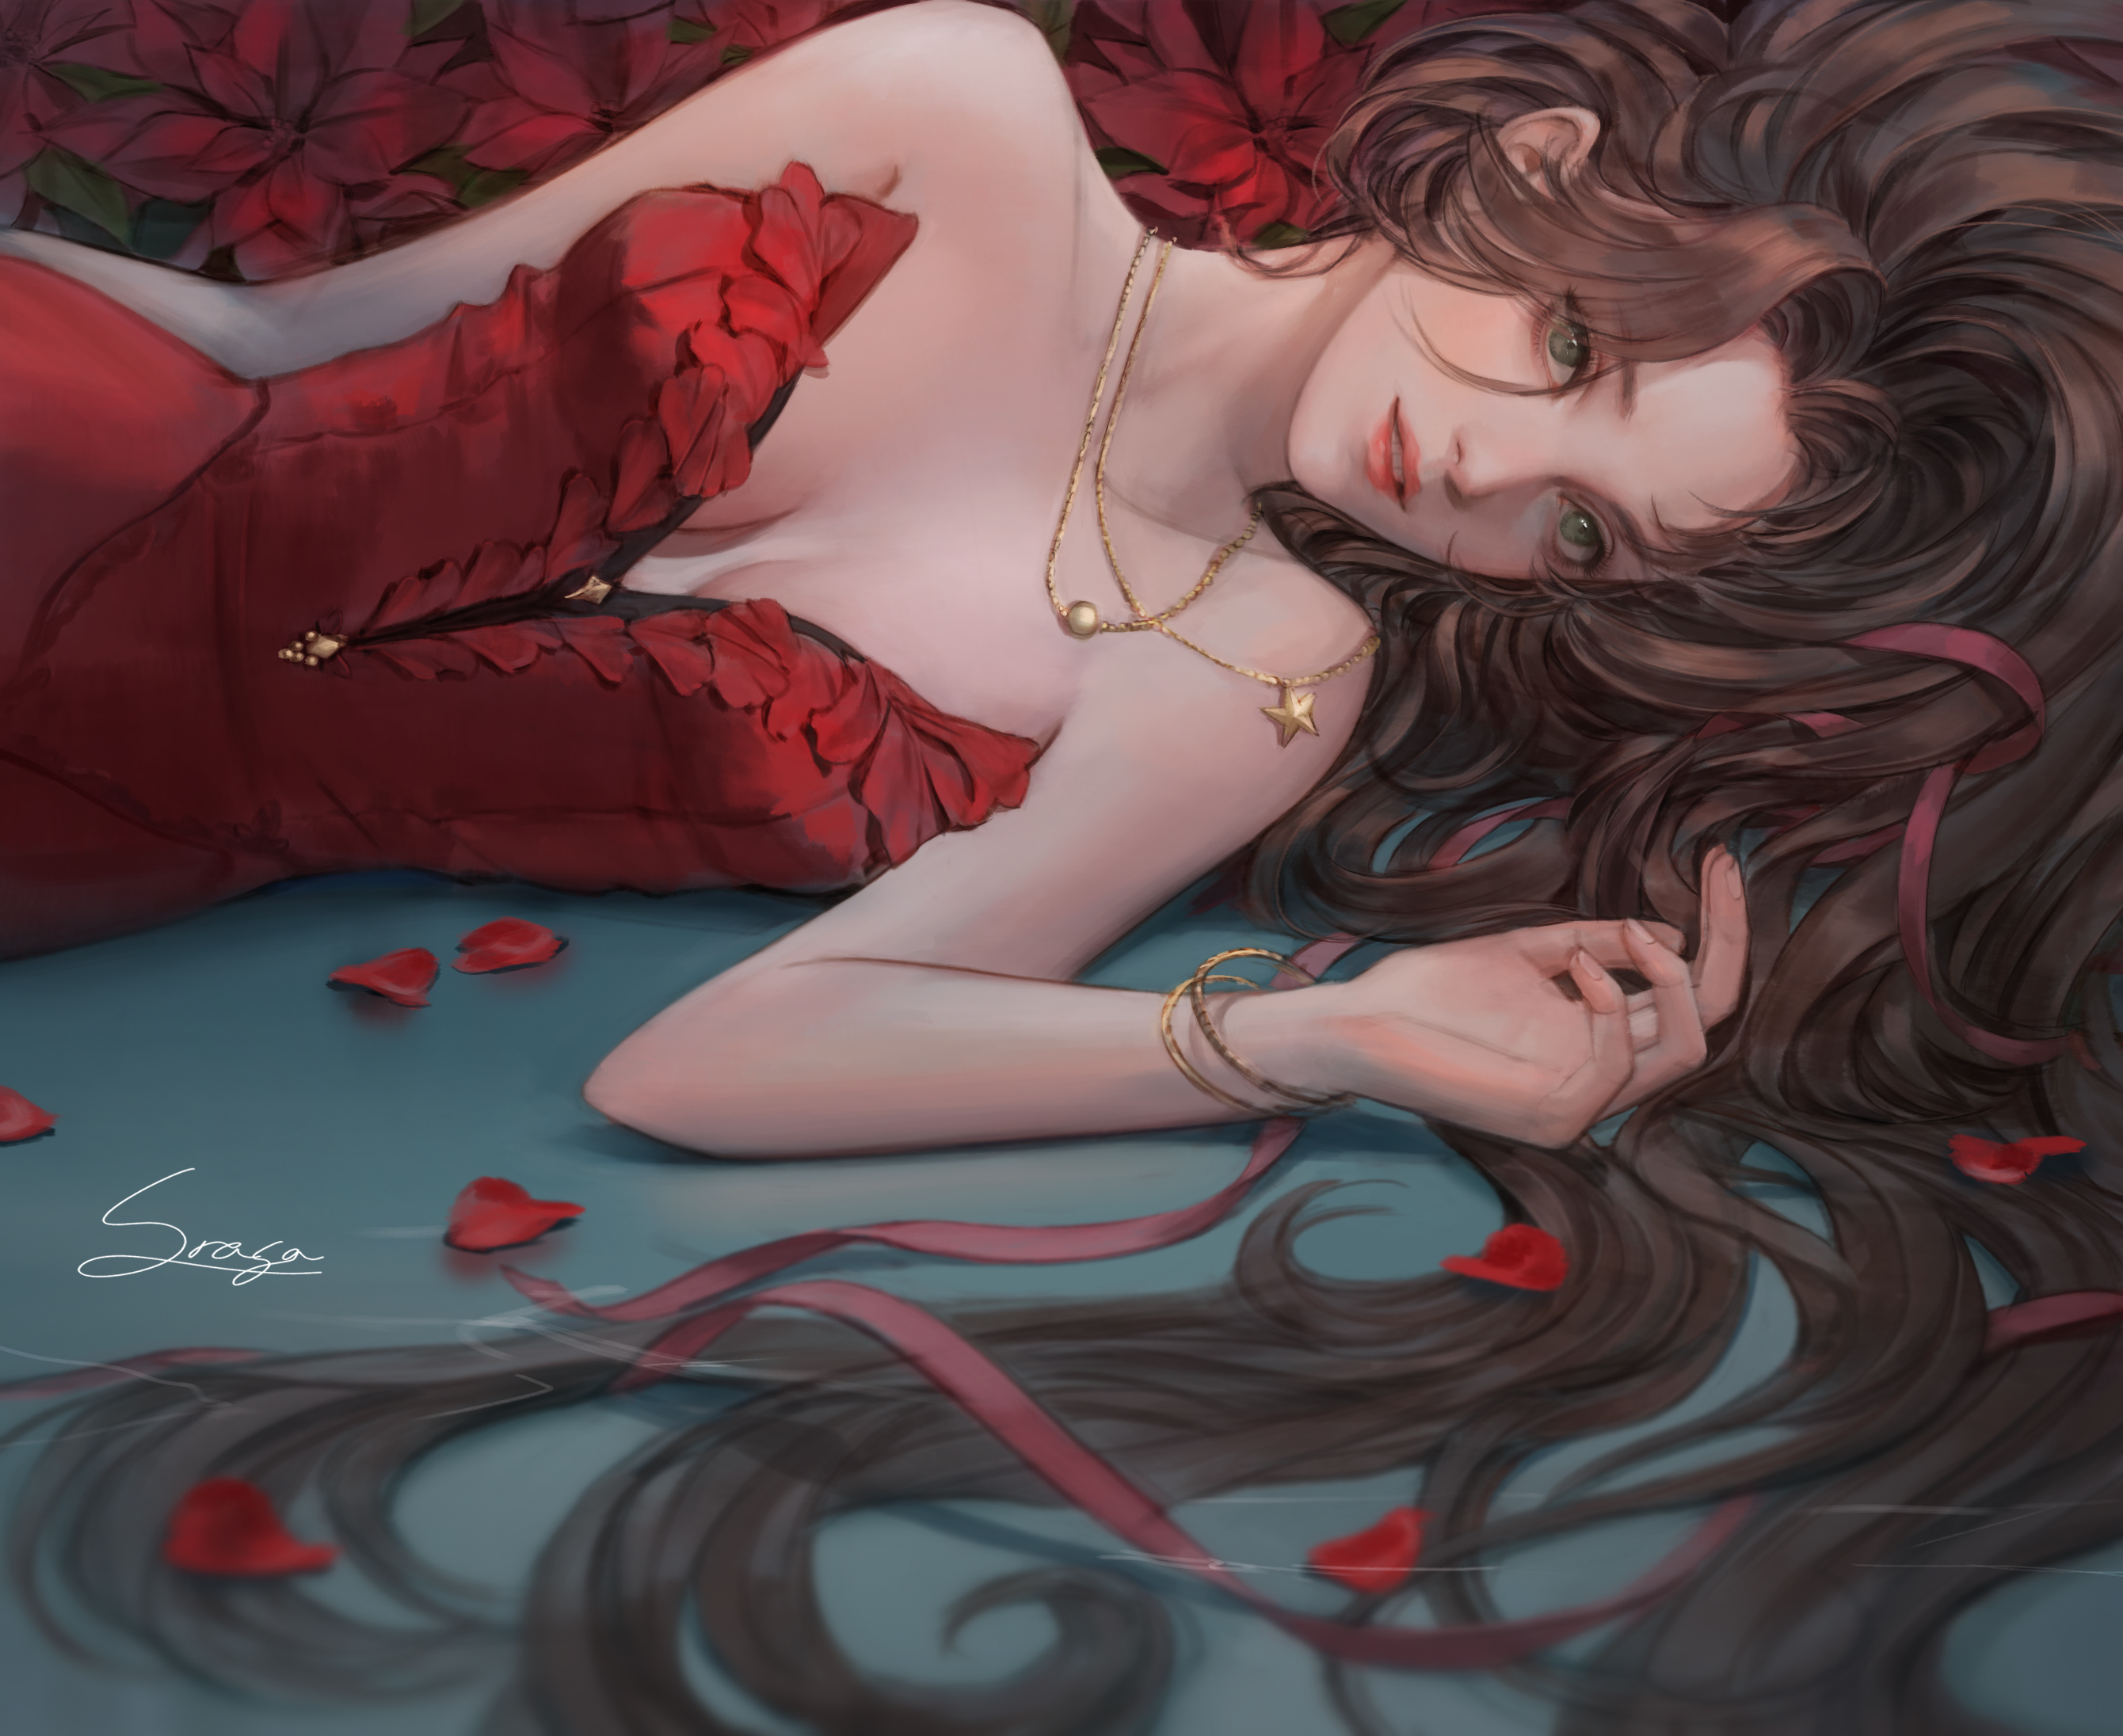 General 2680x2192 Final Fantasy VII women dress red dress necklace brunette boobs cleavage lying on side green eyes video games video game art video game girls Aerith Gainsborough srasa018